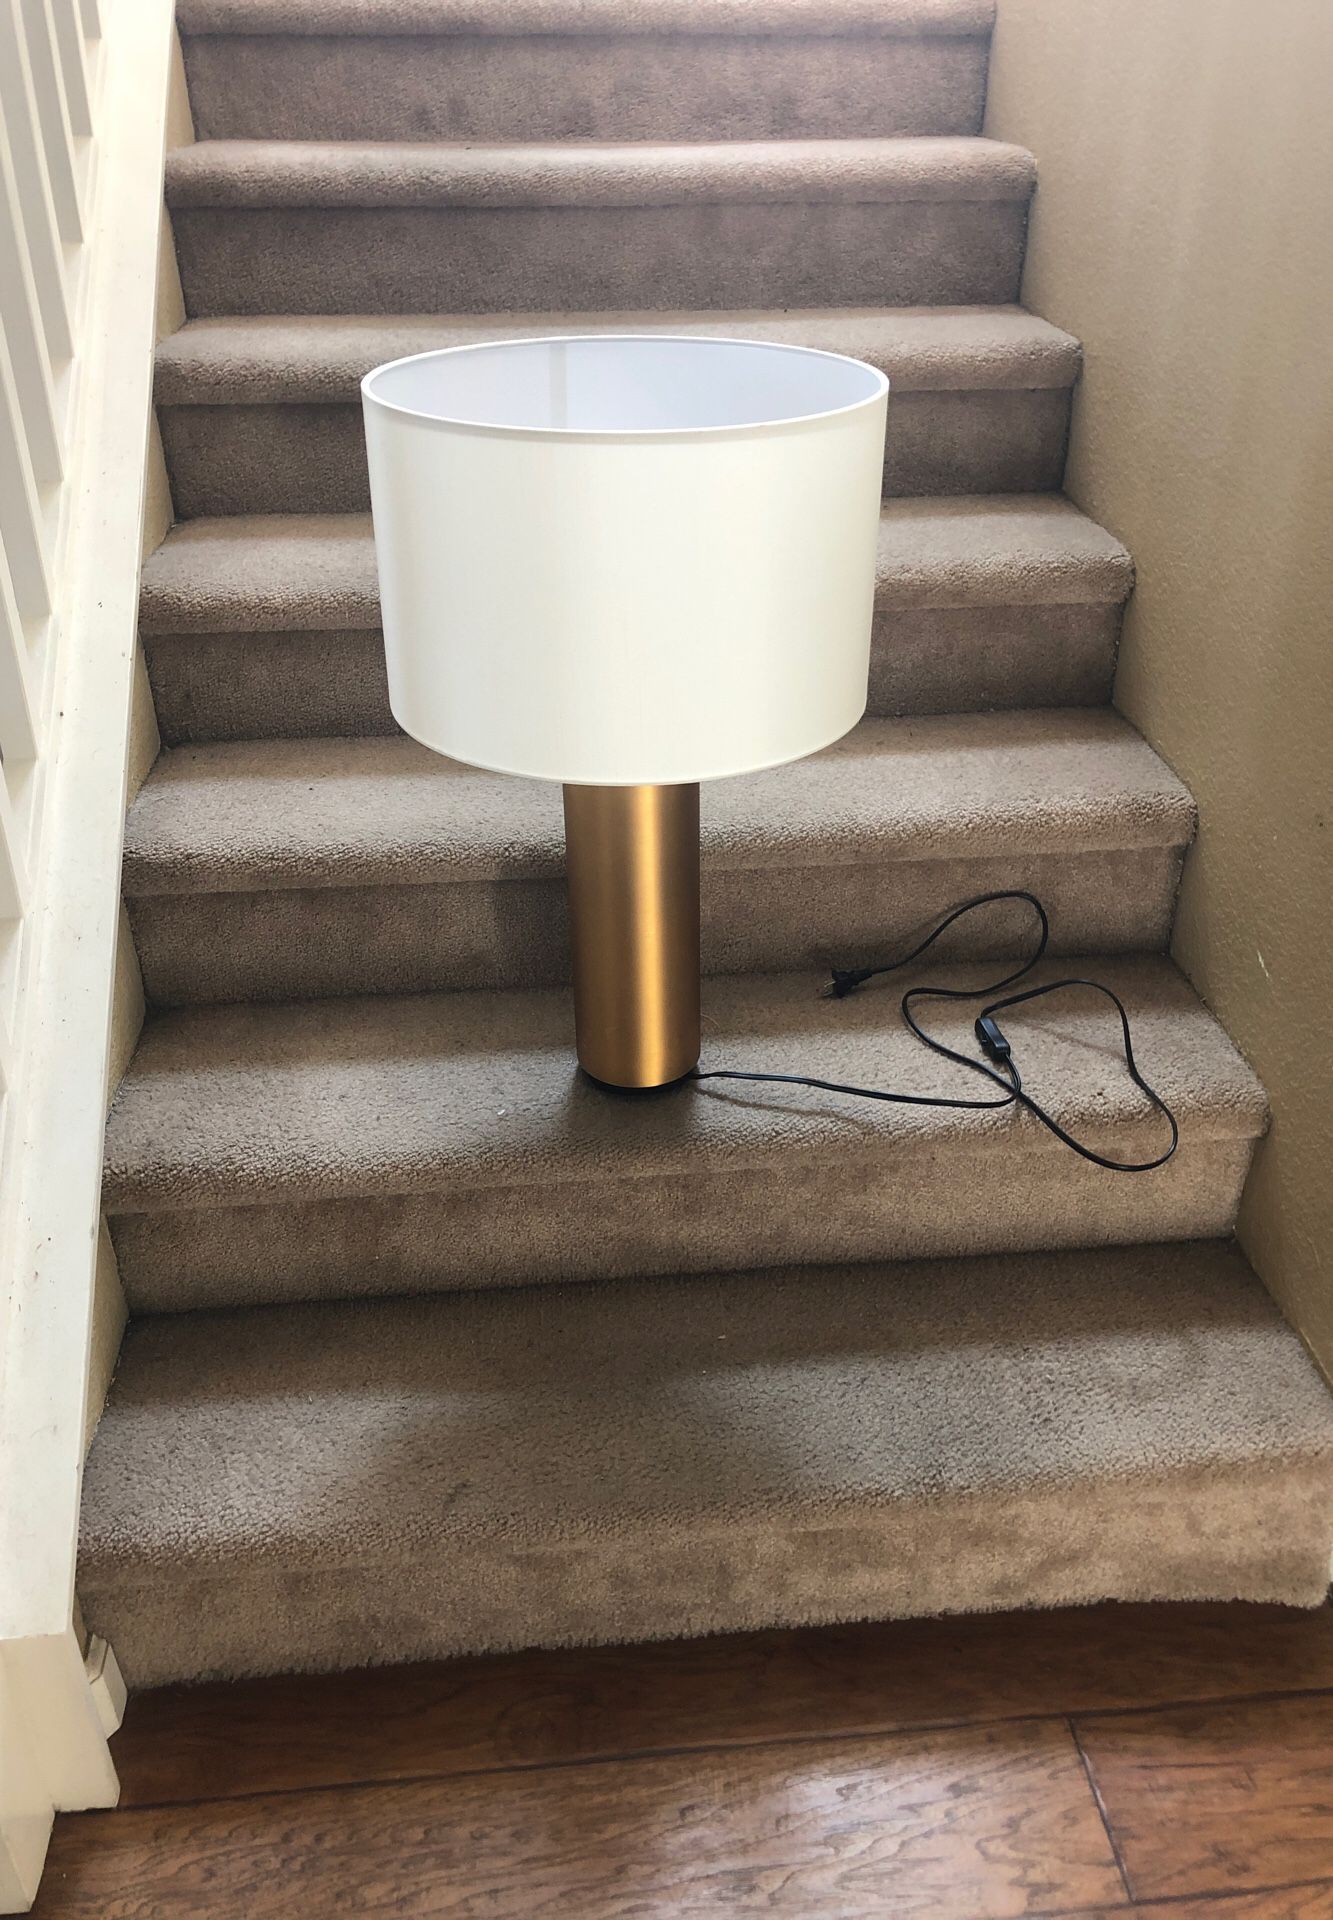 Gold colored lamp